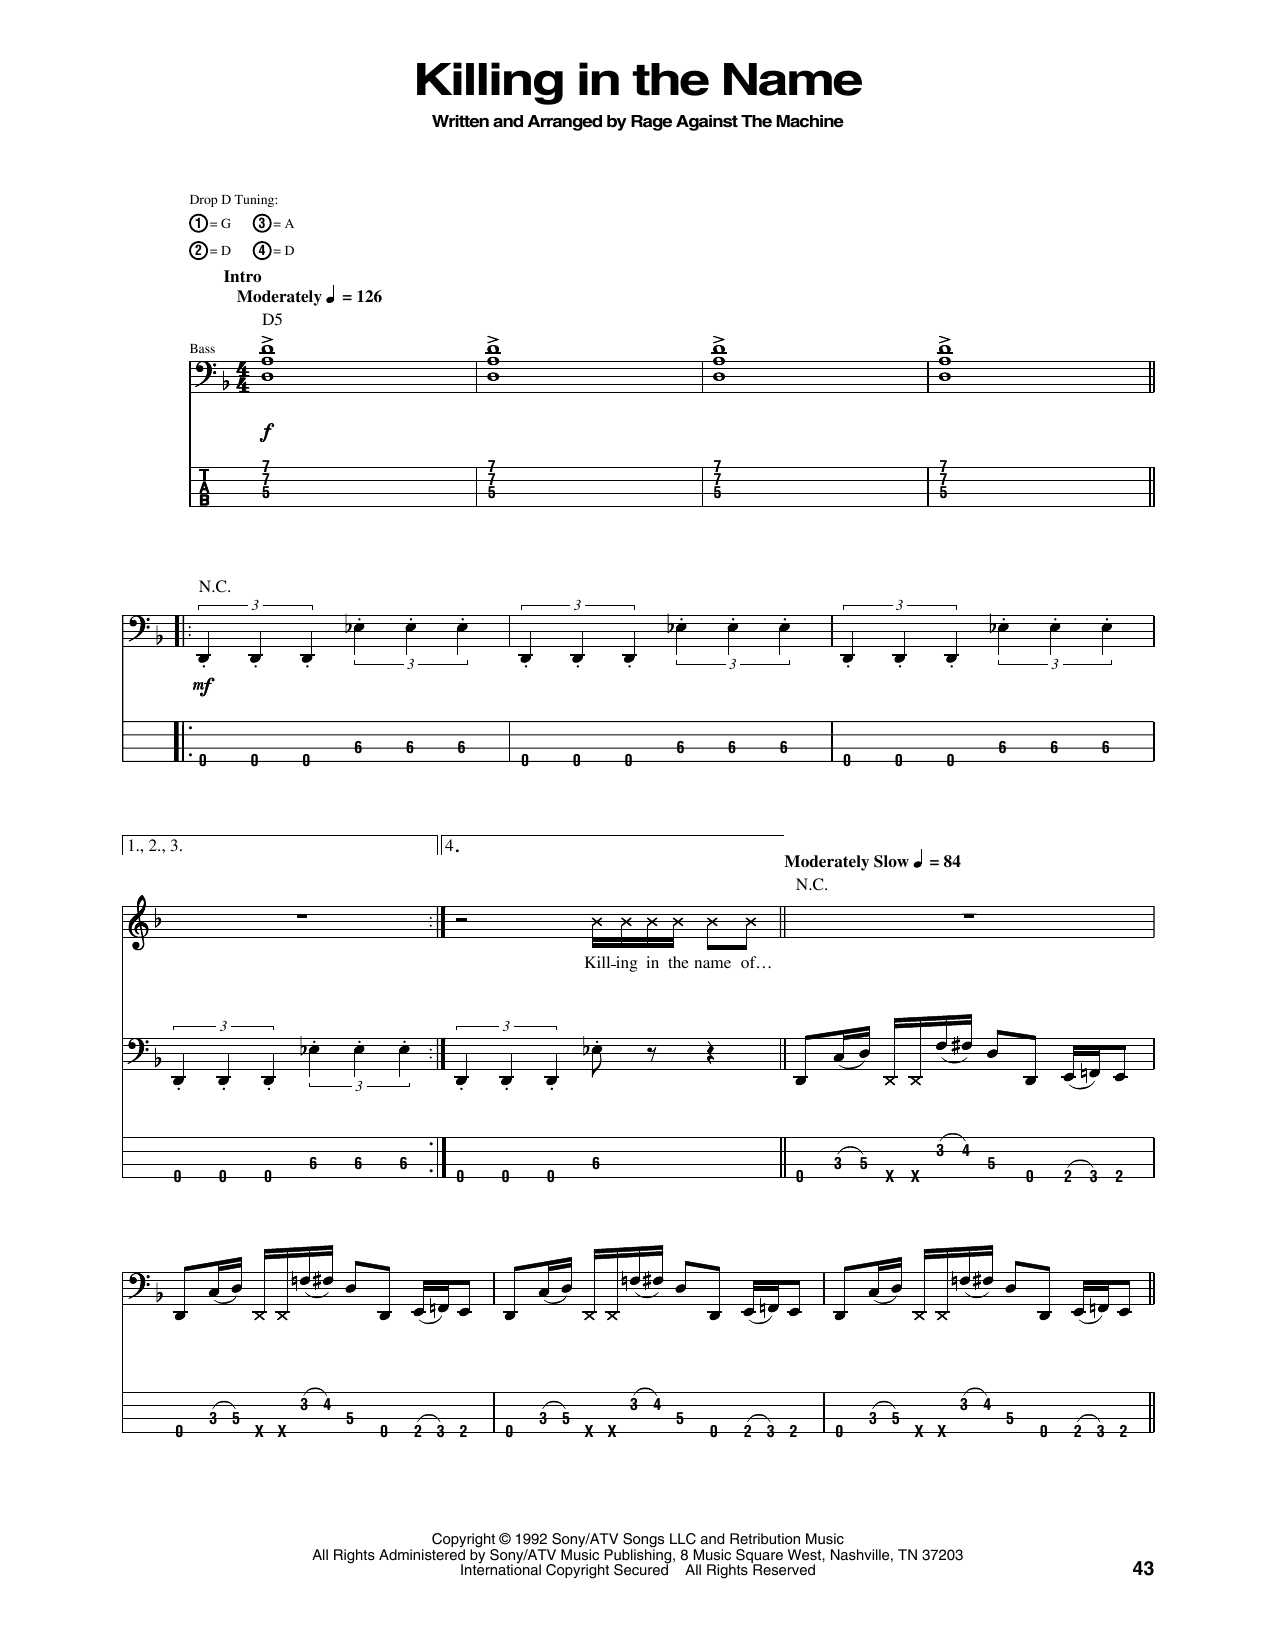 Download Rage Against The Machine Killing In The Name Sheet Music